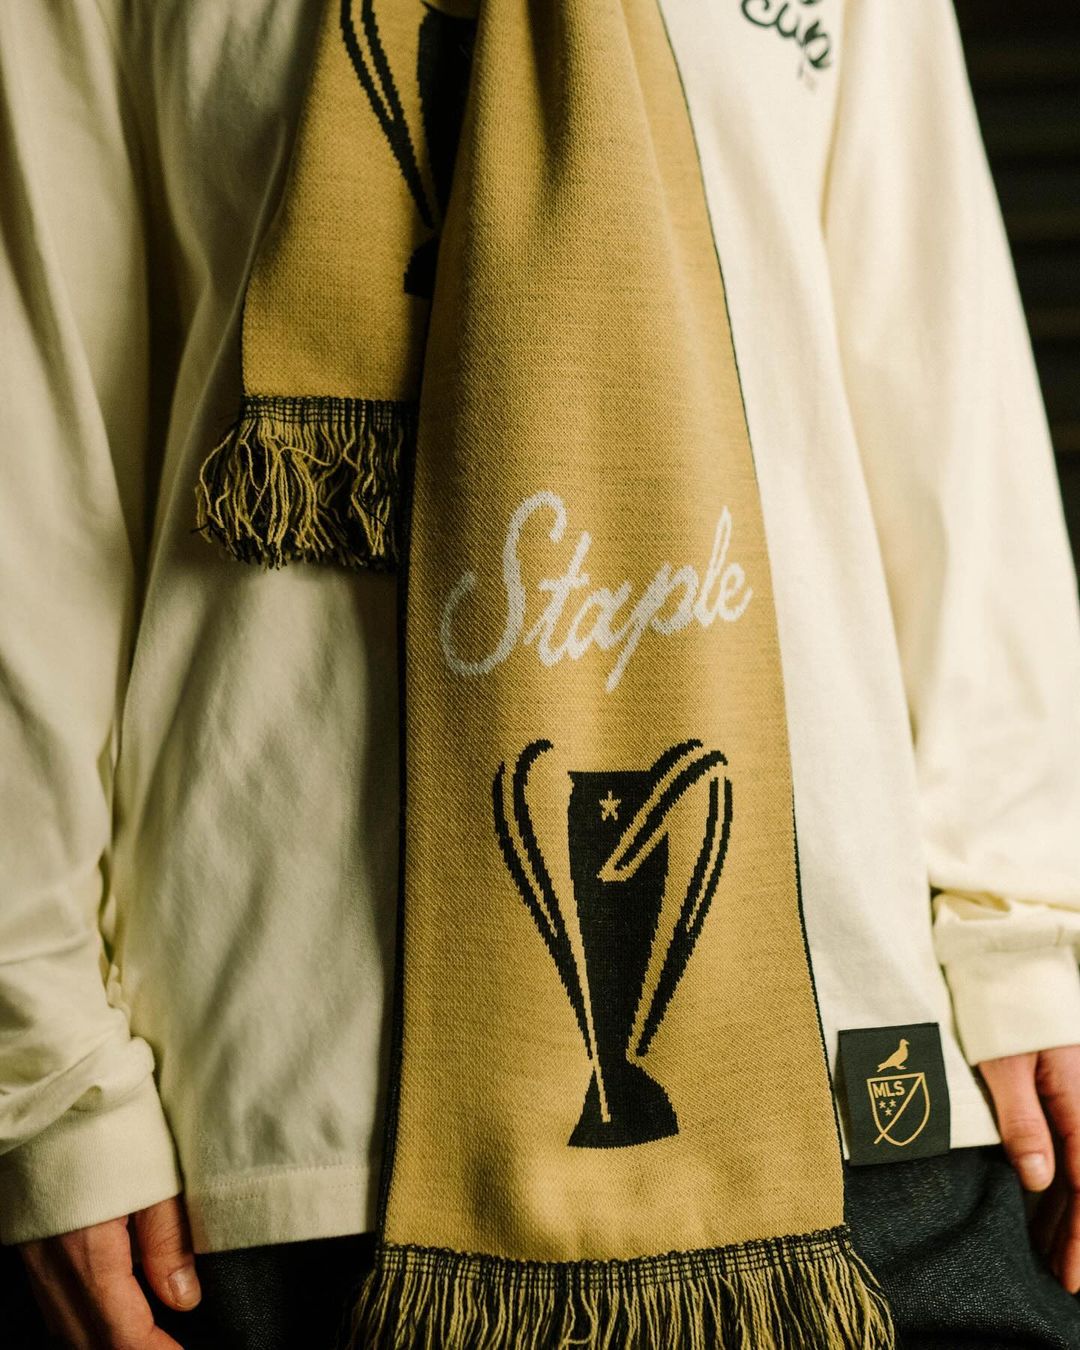 Major League Soccer and Staple Capsule Collection